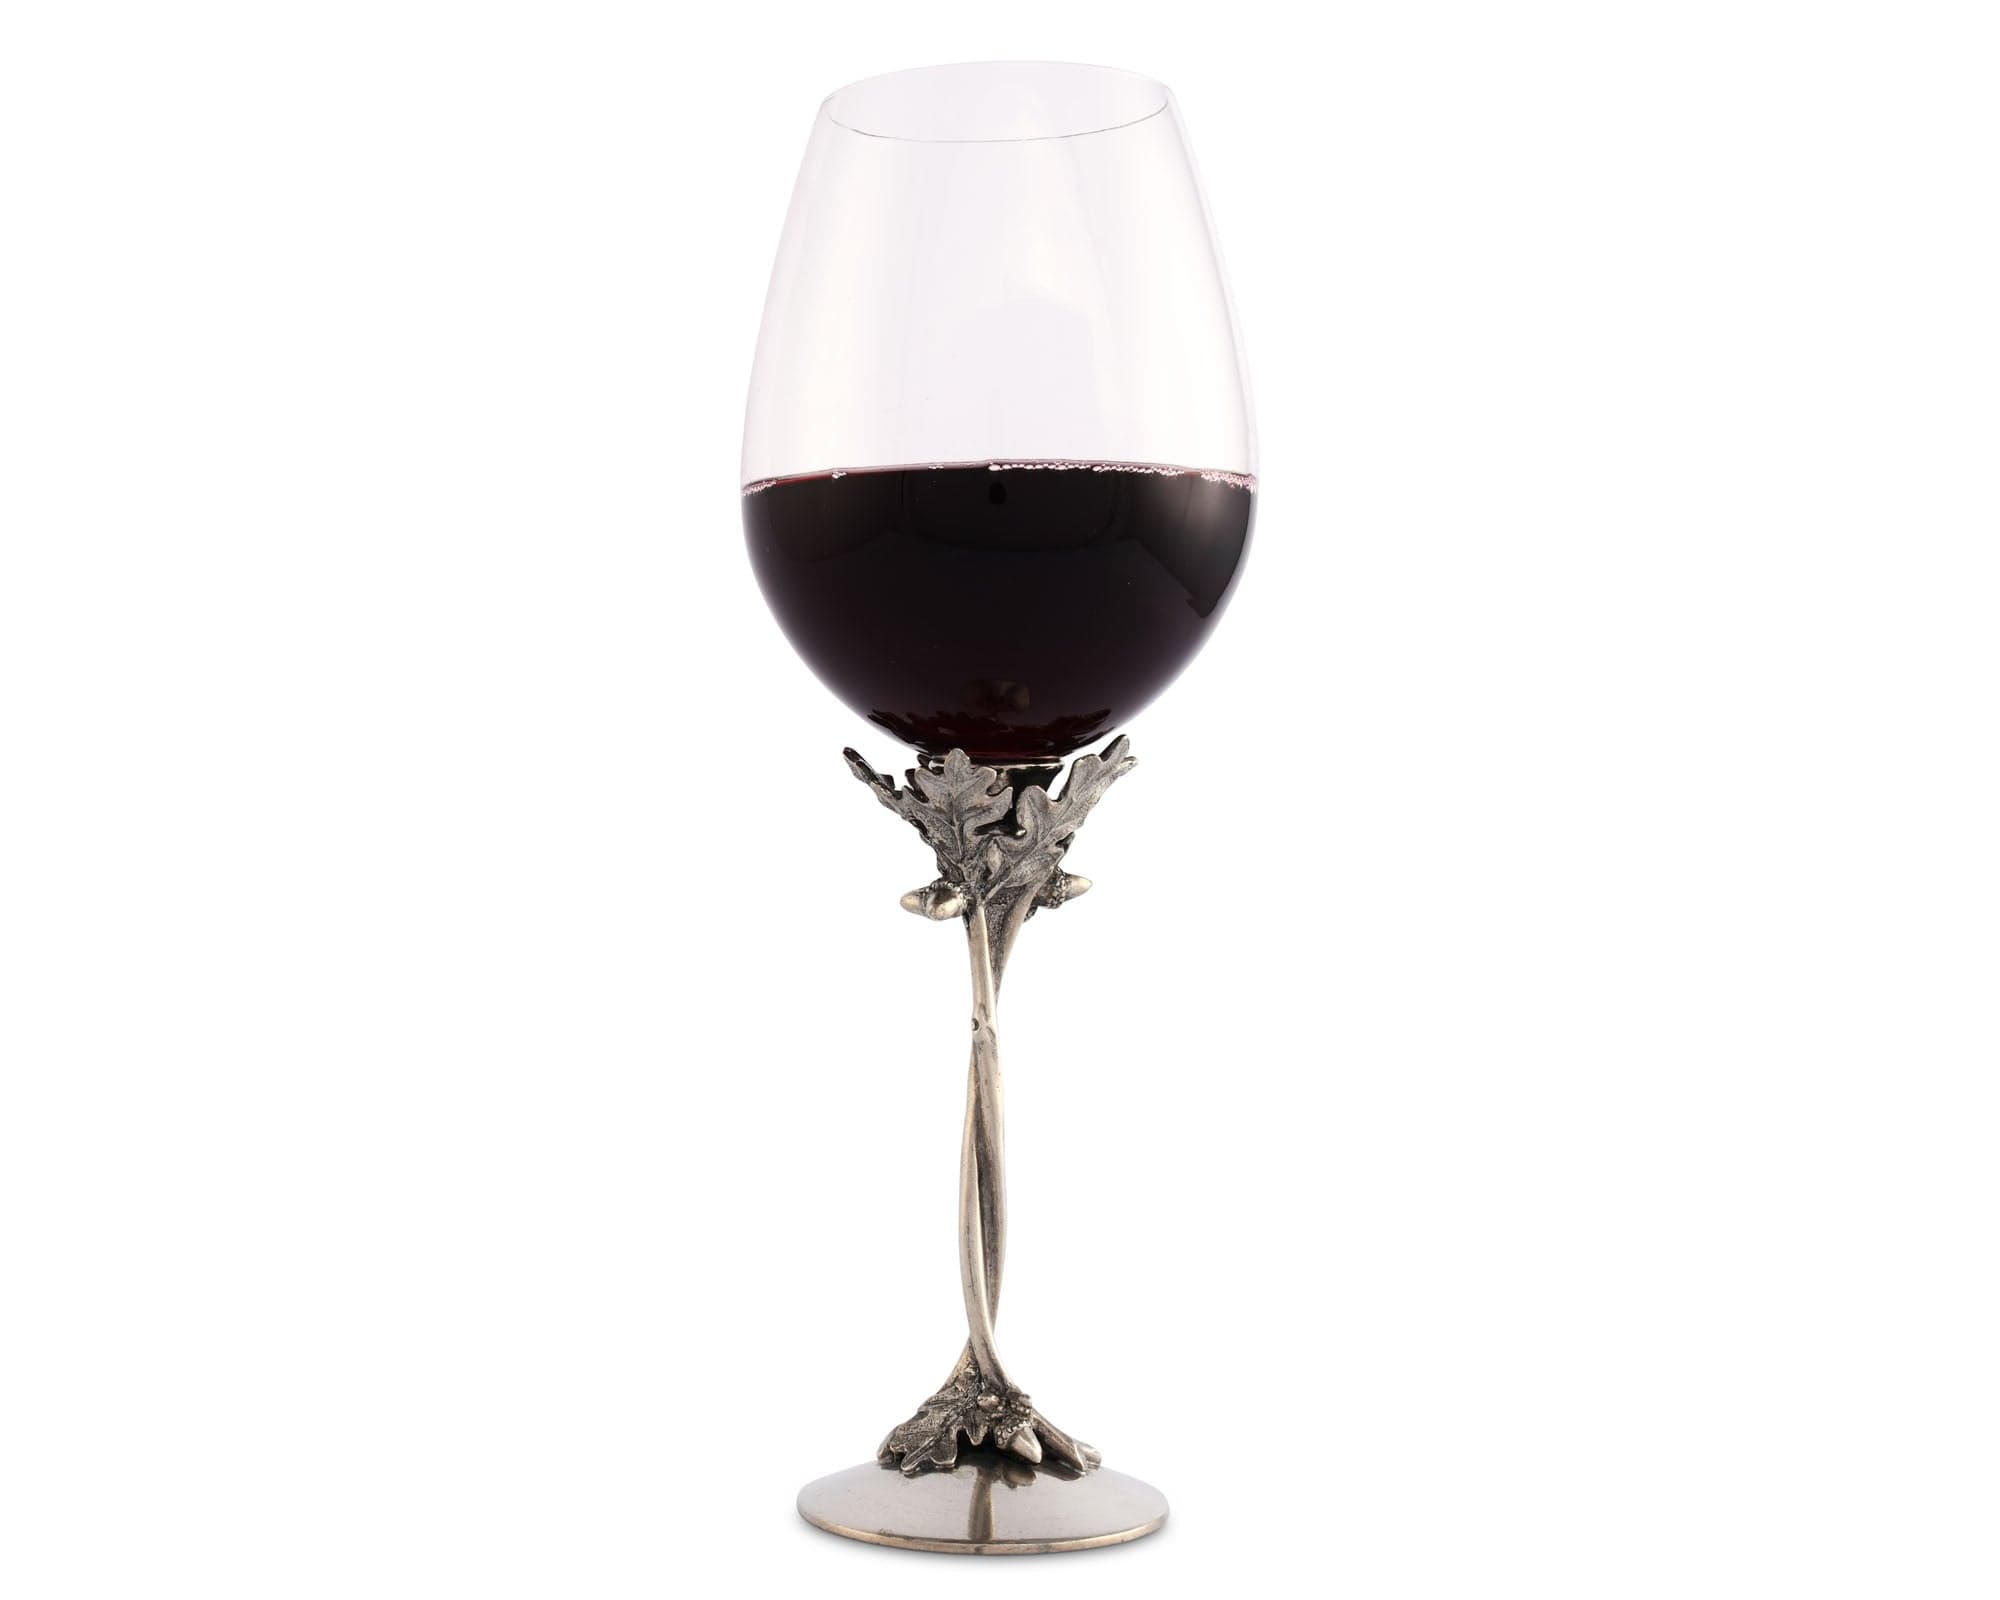 Vagabond House Majestic Forest Red Wine - 10.75" H 15 oz Entwined Oak Pewter Stemware